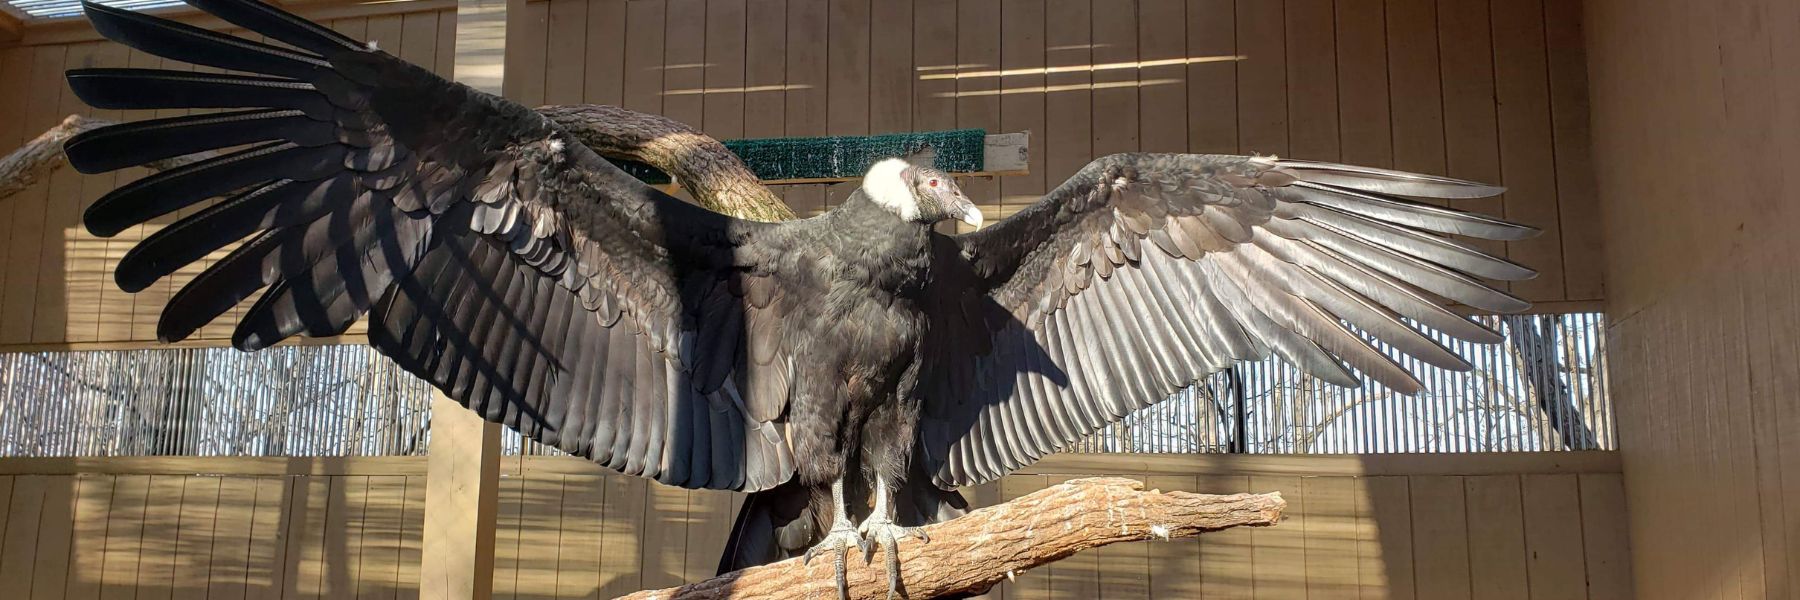 A vulture from the World Bird Sanctuary spreads its wings.